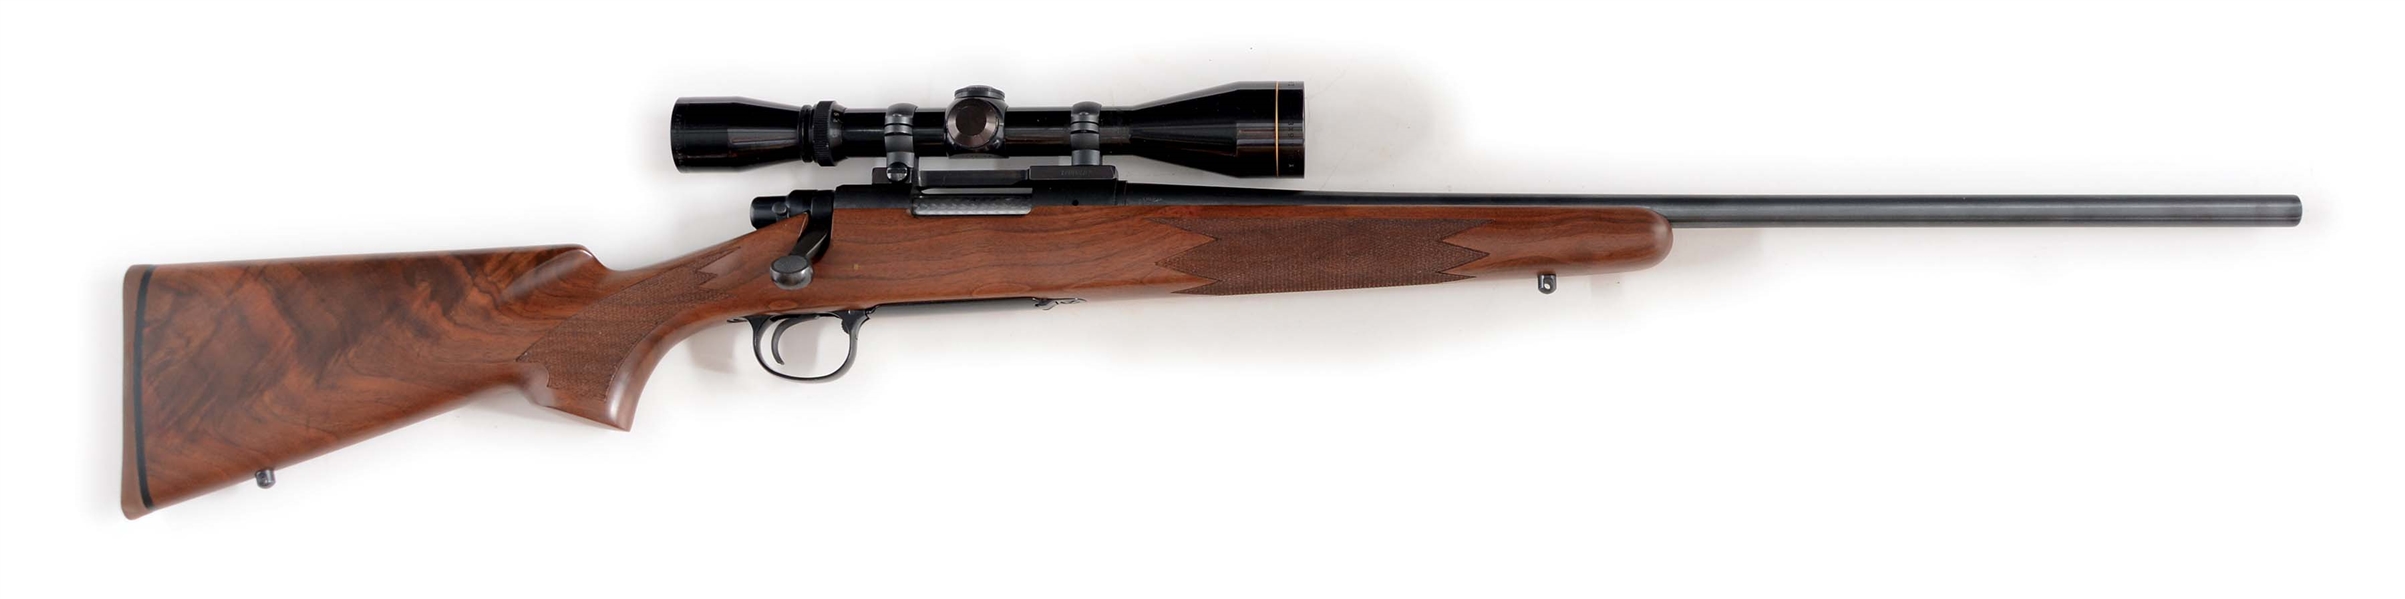 (M) HIGH CONDITION REMINGTON MODEL 700 .223 SPORTING RIFLE.